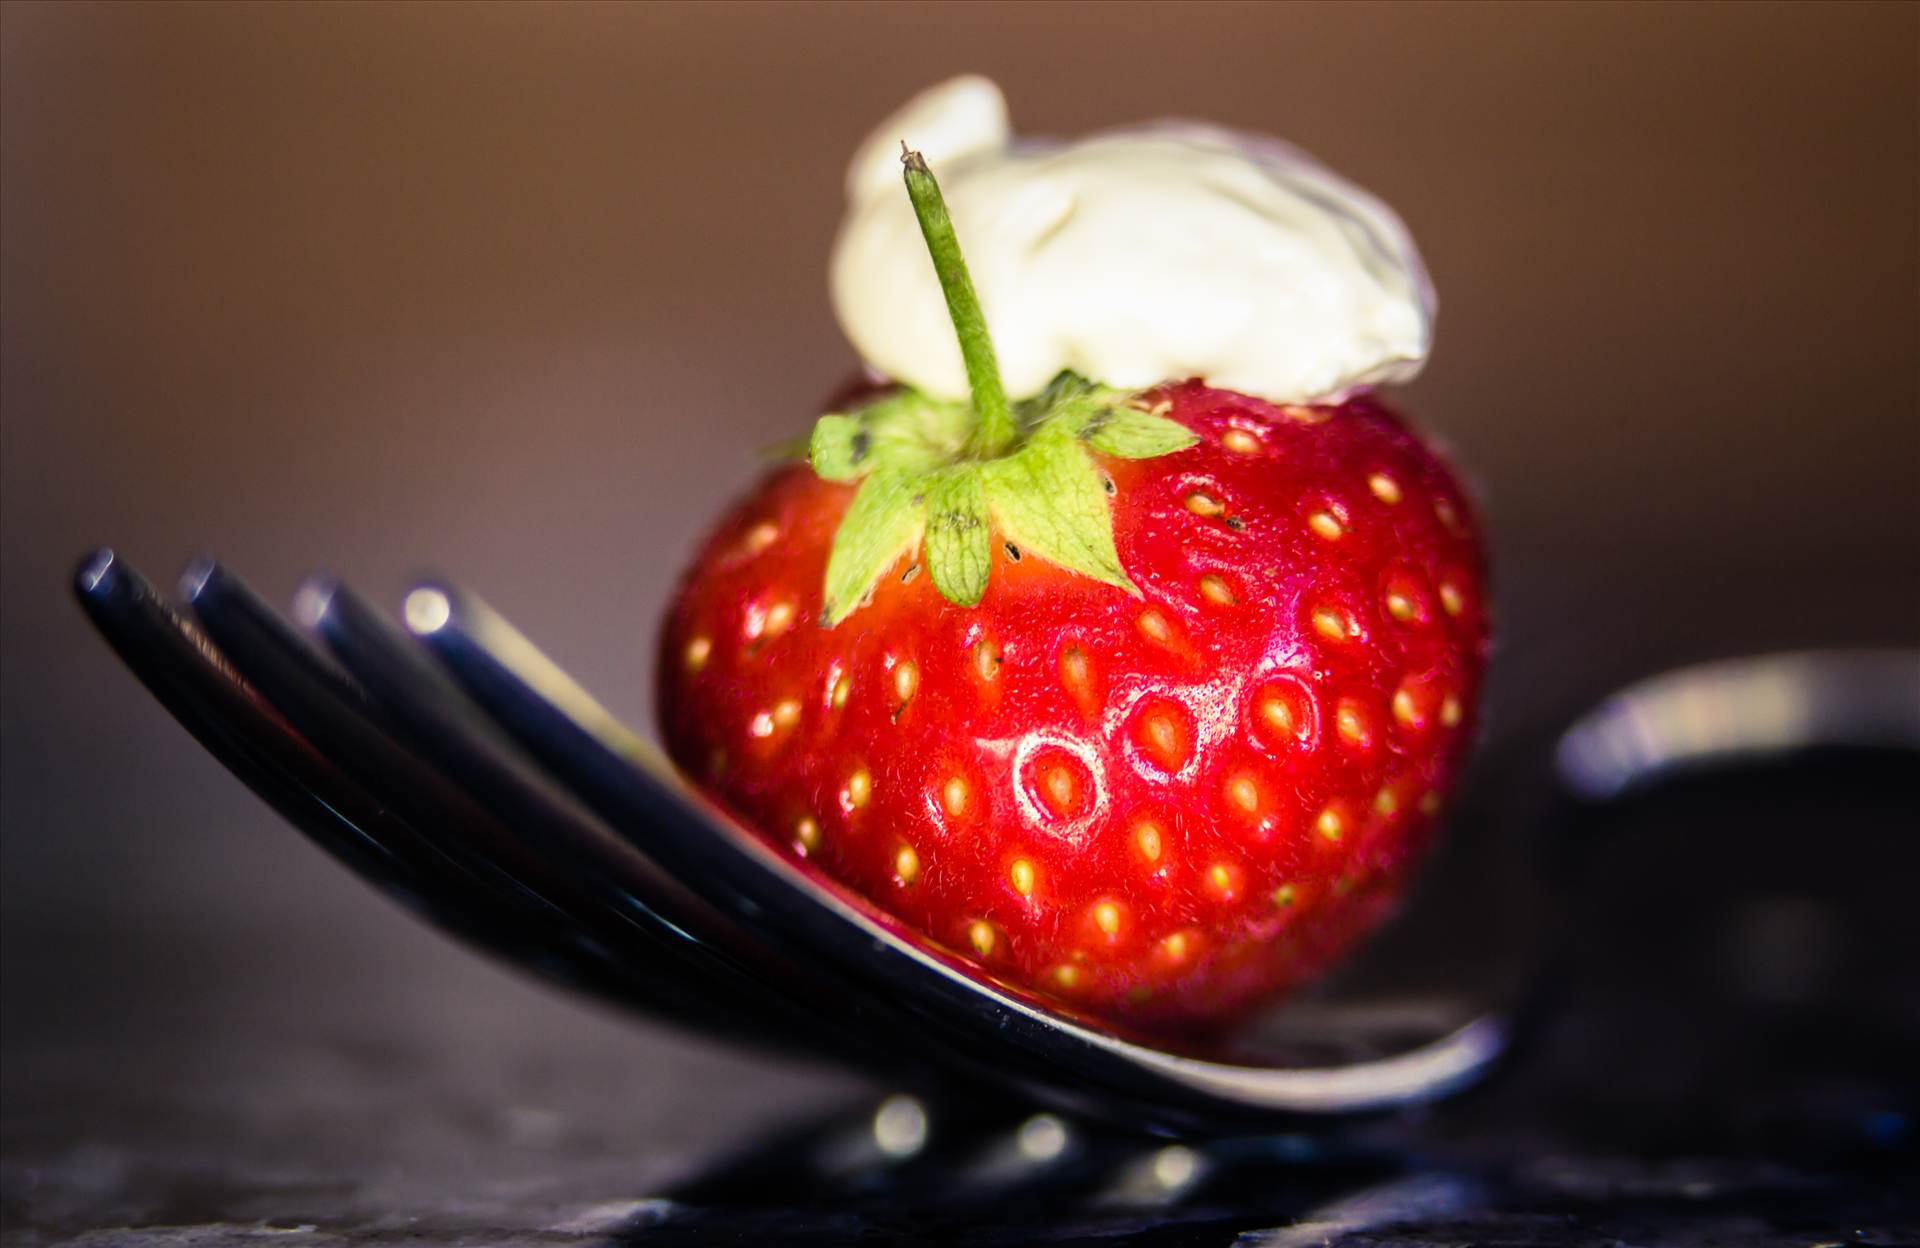 Strawberry and cream.jpg  by WPC-187